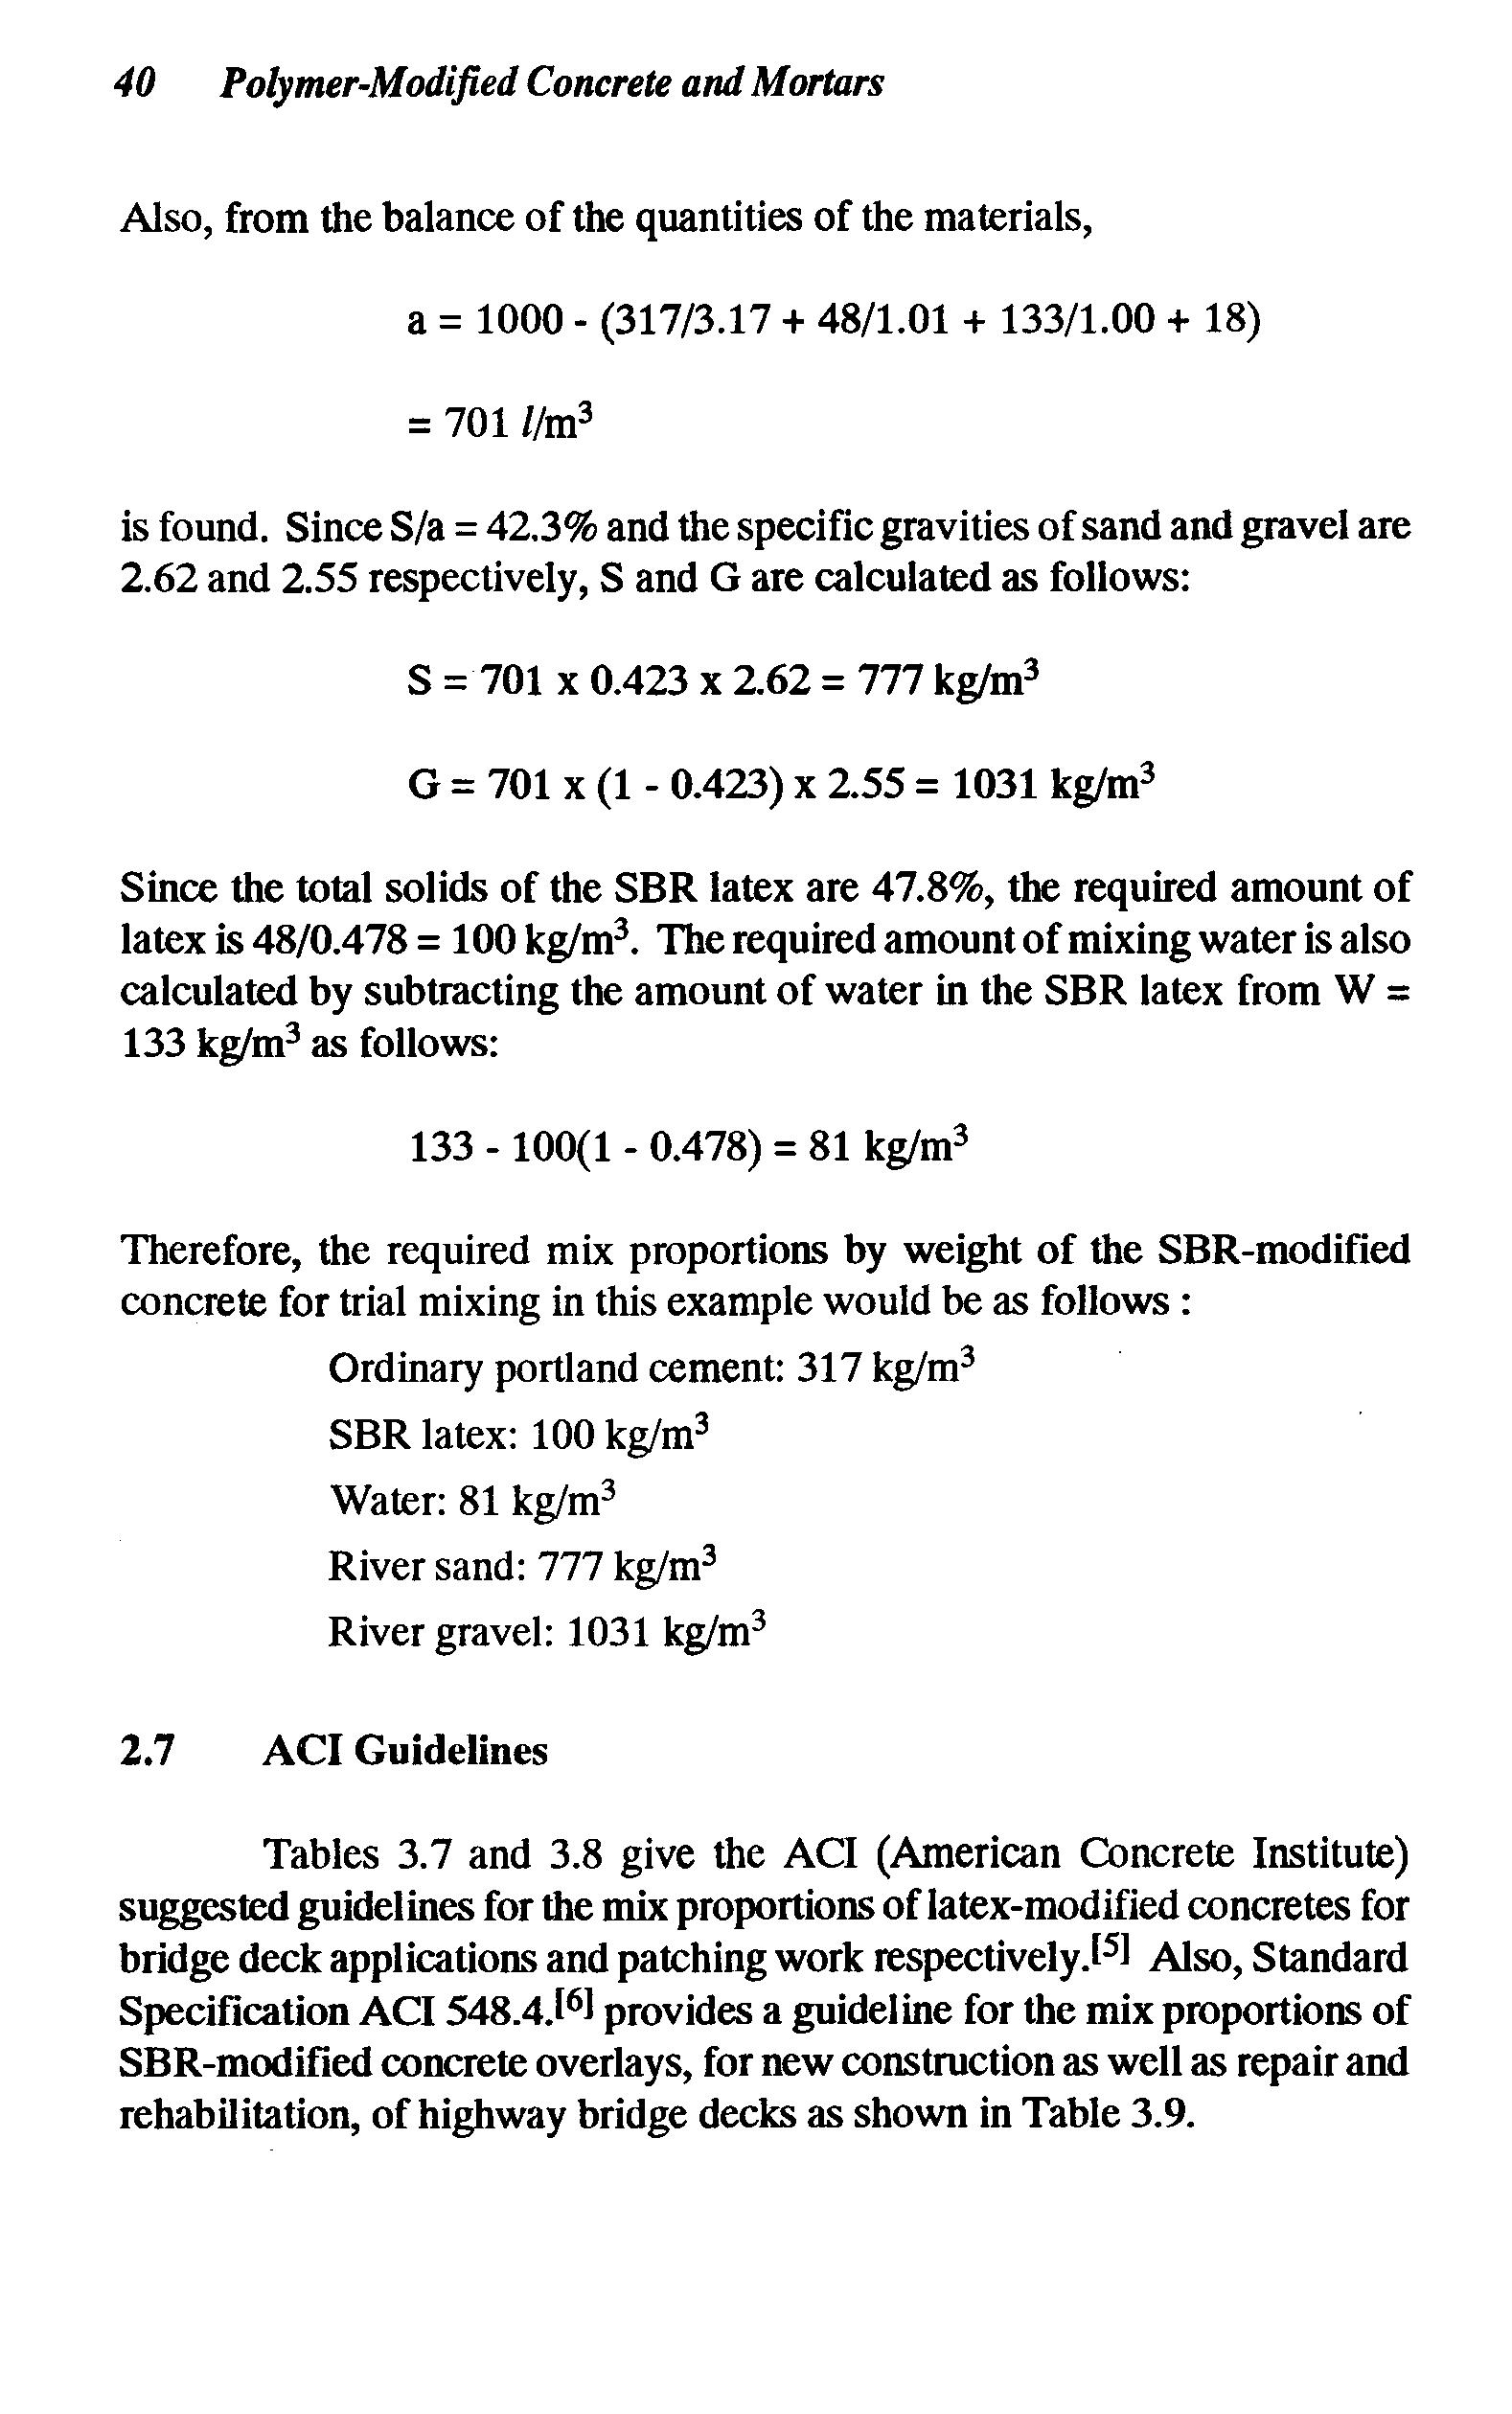 Tables 3.7 and 3.8 give the ACI (American Concrete Institute) suggested guidelines for the mix proportions of latex-modified concretes for bridge deck applications and patching work respectively.l J Also, Standard Specification ACI 548.4.1 1 provides a guideline for the mix proportions of SBR-modifled concrete overlays, for new construction as well as repair and rehabilitation, of highway bridge decks as shown in Table 3.9.